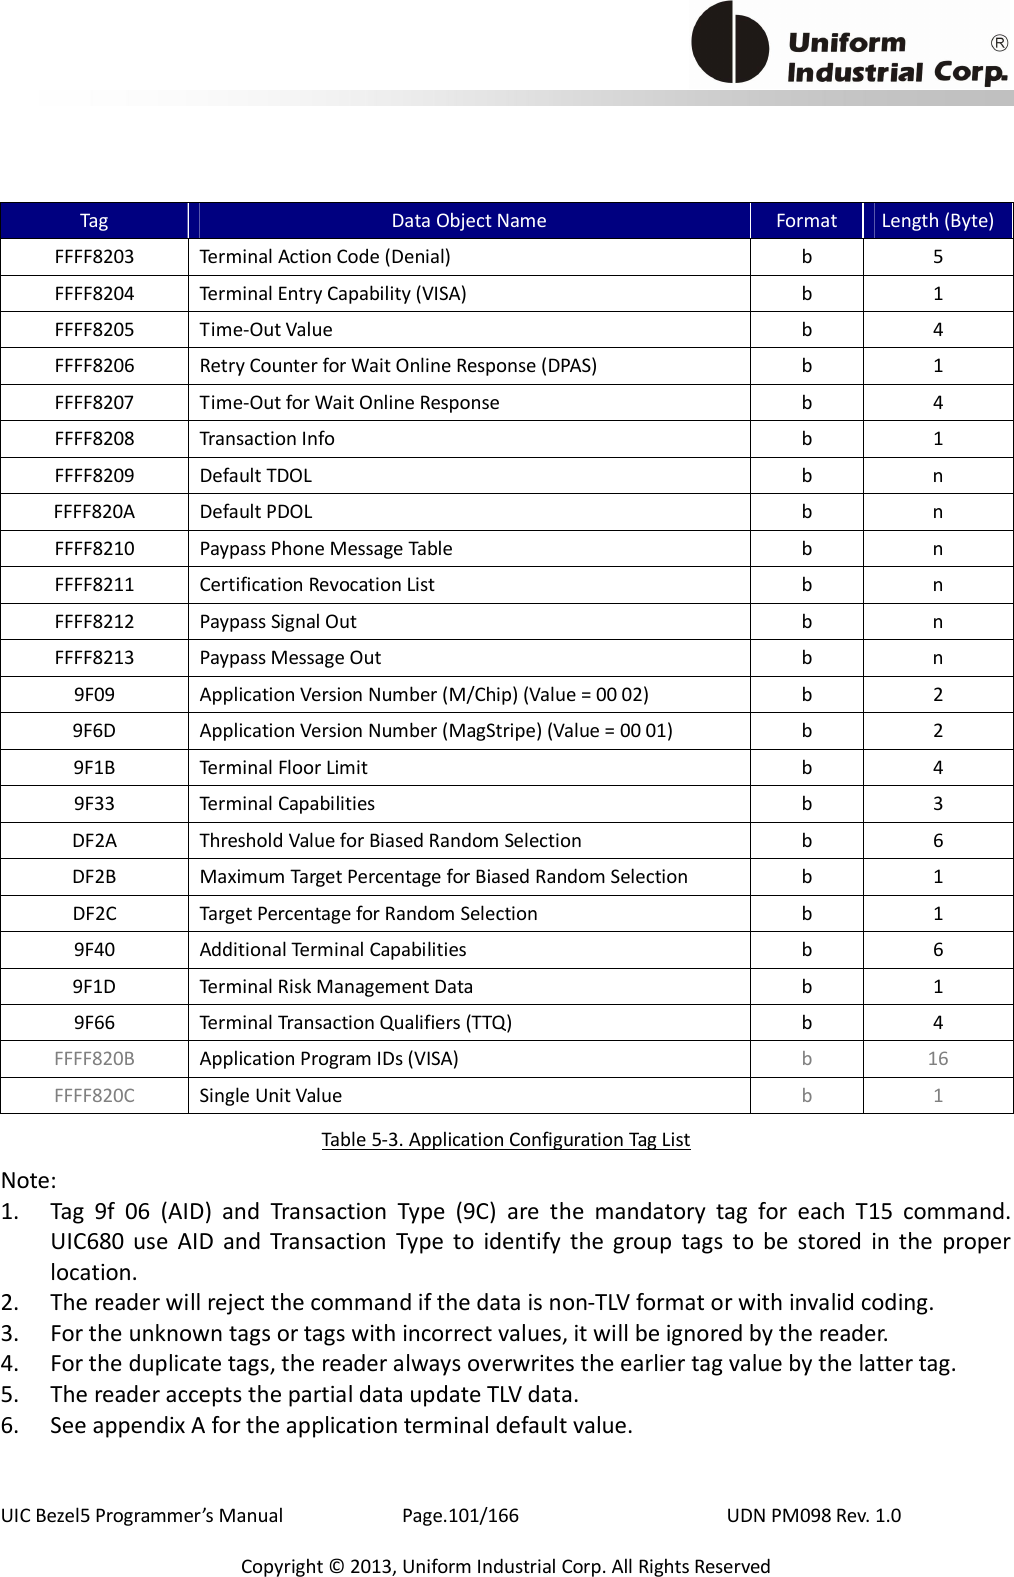                                           UIC Bezel5 Programmer’s Manual      Page.101/166                    UDN PM098 Rev. 1.0 Copyright © 2013, Uniform Industrial Corp. All Rights Reserved Tag  Data Object Name  Format  Length (Byte) FFFF8203  Terminal Action Code (Denial)  b  5 FFFF8204  Terminal Entry Capability (VISA)  b  1 FFFF8205  Time-Out Value    b  4 FFFF8206  Retry Counter for Wait Online Response (DPAS)  b  1 FFFF8207  Time-Out for Wait Online Response    b  4 FFFF8208  Transaction Info  b  1 FFFF8209  Default TDOL  b  n FFFF820A  Default PDOL  b  n FFFF8210  Paypass Phone Message Table  b  n FFFF8211  Certification Revocation List  b  n FFFF8212  Paypass Signal Out  b  n FFFF8213  Paypass Message Out  b  n 9F09  Application Version Number (M/Chip) (Value = 00 02)  b  2 9F6D  Application Version Number (MagStripe) (Value = 00 01)  b  2 9F1B  Terminal Floor Limit  b  4 9F33  Terminal Capabilities  b  3 DF2A  Threshold Value for Biased Random Selection  b  6 DF2B  Maximum Target Percentage for Biased Random Selection  b  1 DF2C  Target Percentage for Random Selection  b  1 9F40  Additional Terminal Capabilities  b  6 9F1D  Terminal Risk Management Data  b  1 9F66  Terminal Transaction Qualifiers (TTQ)  b  4 FFFF820B  Application Program IDs (VISA)  b  16 FFFF820C  Single Unit Value  b  1 Table 5-3. Application Configuration Tag List Note: 1. Tag  9f  06  (AID)  and  Transaction  Type  (9C)  are  the  mandatory  tag  for  each  T15  command. UIC680  use  AID  and  Transaction  Type  to  identify  the  group  tags  to  be  stored  in  the  proper location. 2. The reader will reject the command if the data is non-TLV format or with invalid coding.   3. For the unknown tags or tags with incorrect values, it will be ignored by the reader. 4. For the duplicate tags, the reader always overwrites the earlier tag value by the latter tag. 5. The reader accepts the partial data update TLV data.   6. See appendix A for the application terminal default value. 